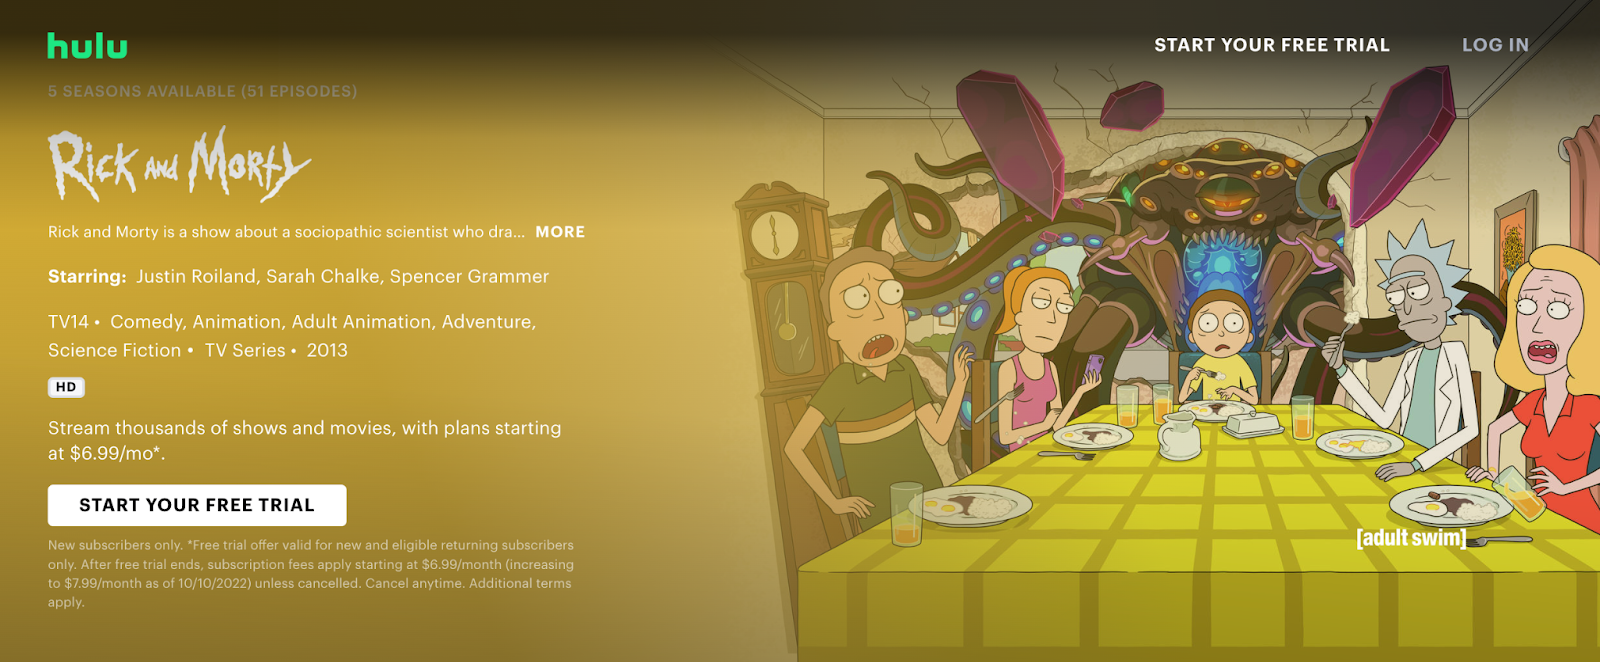 Rick and Morty series available on Hulu.